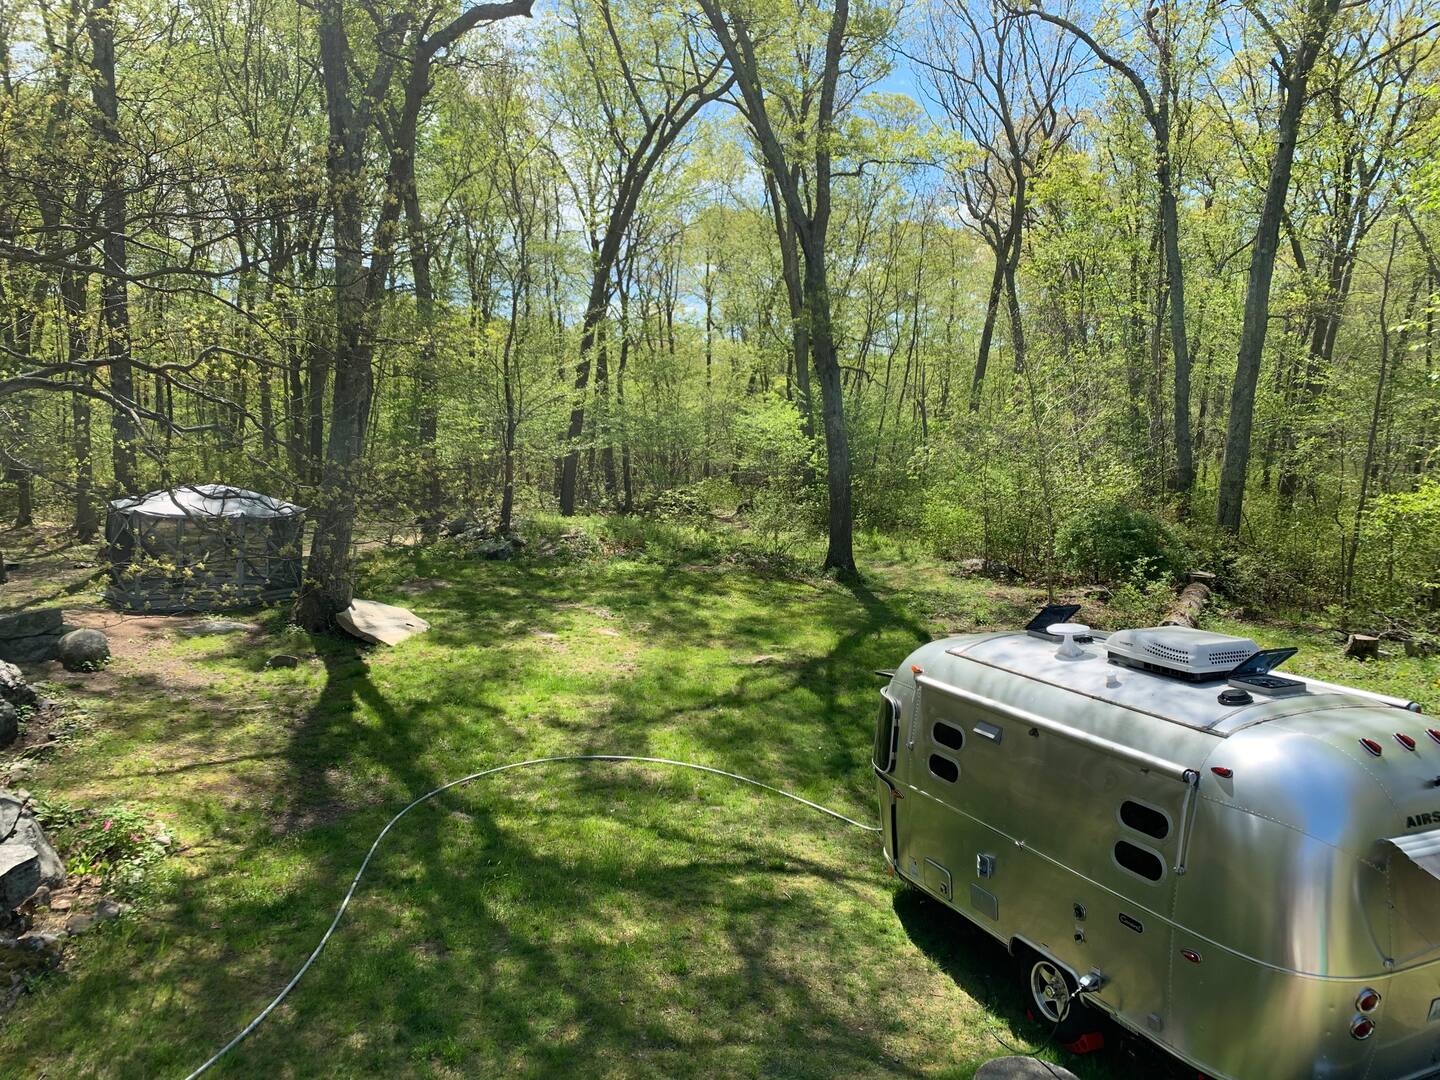 Iconic 2021 Airstream Camper on Private Land